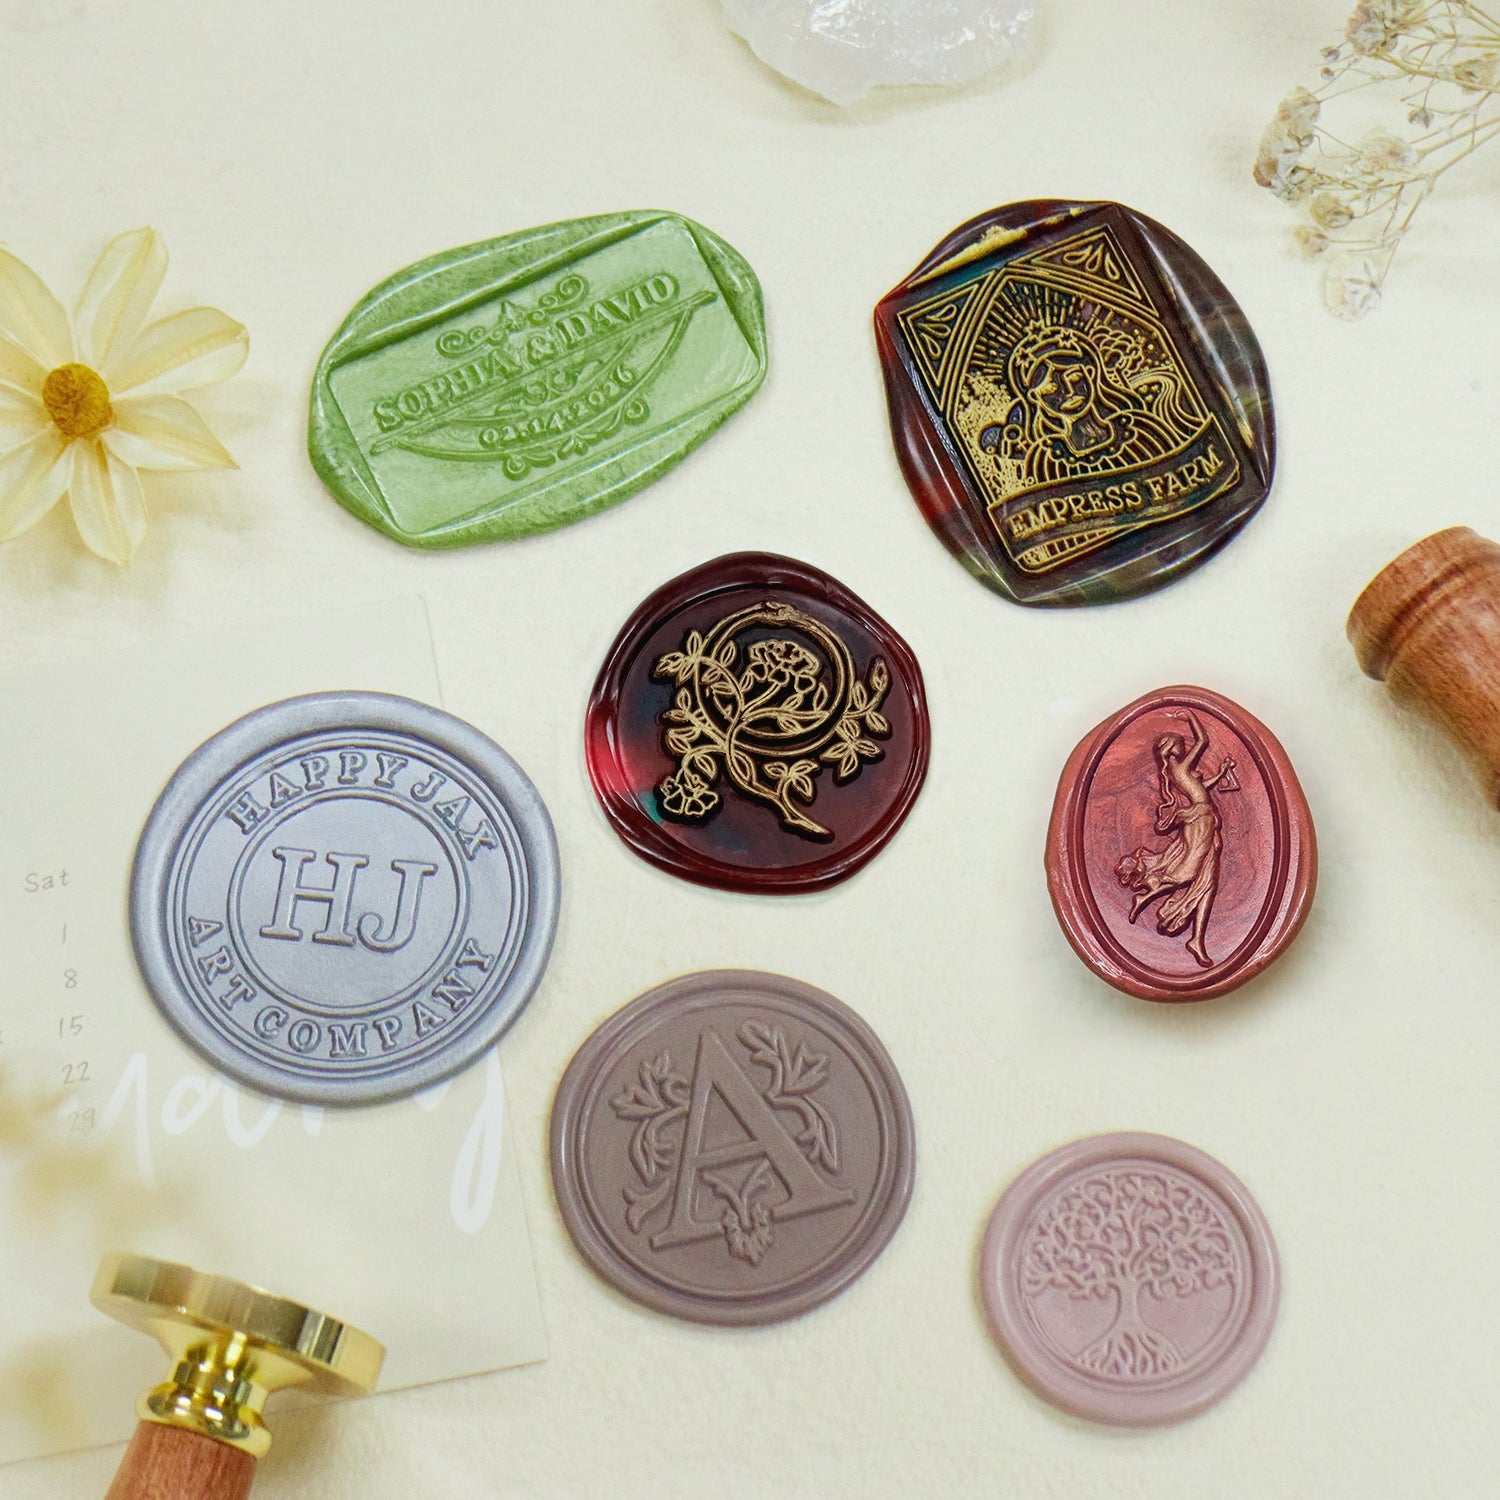 Personalised custom wax seal stamp or kit with business logo or wedding  design